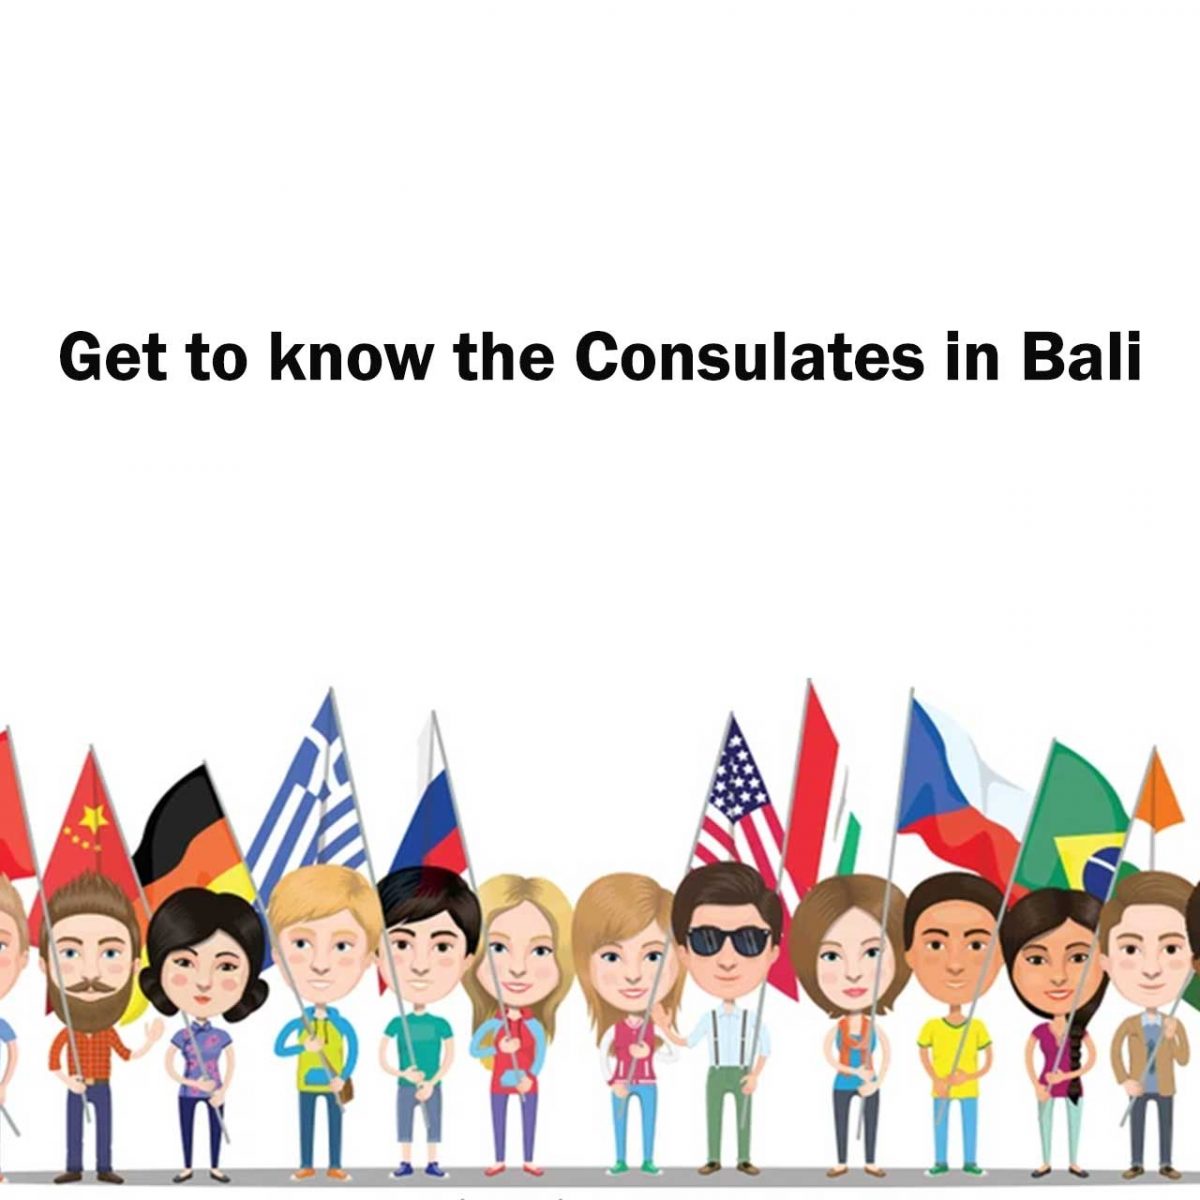 Get to know the Consulates in Bali well